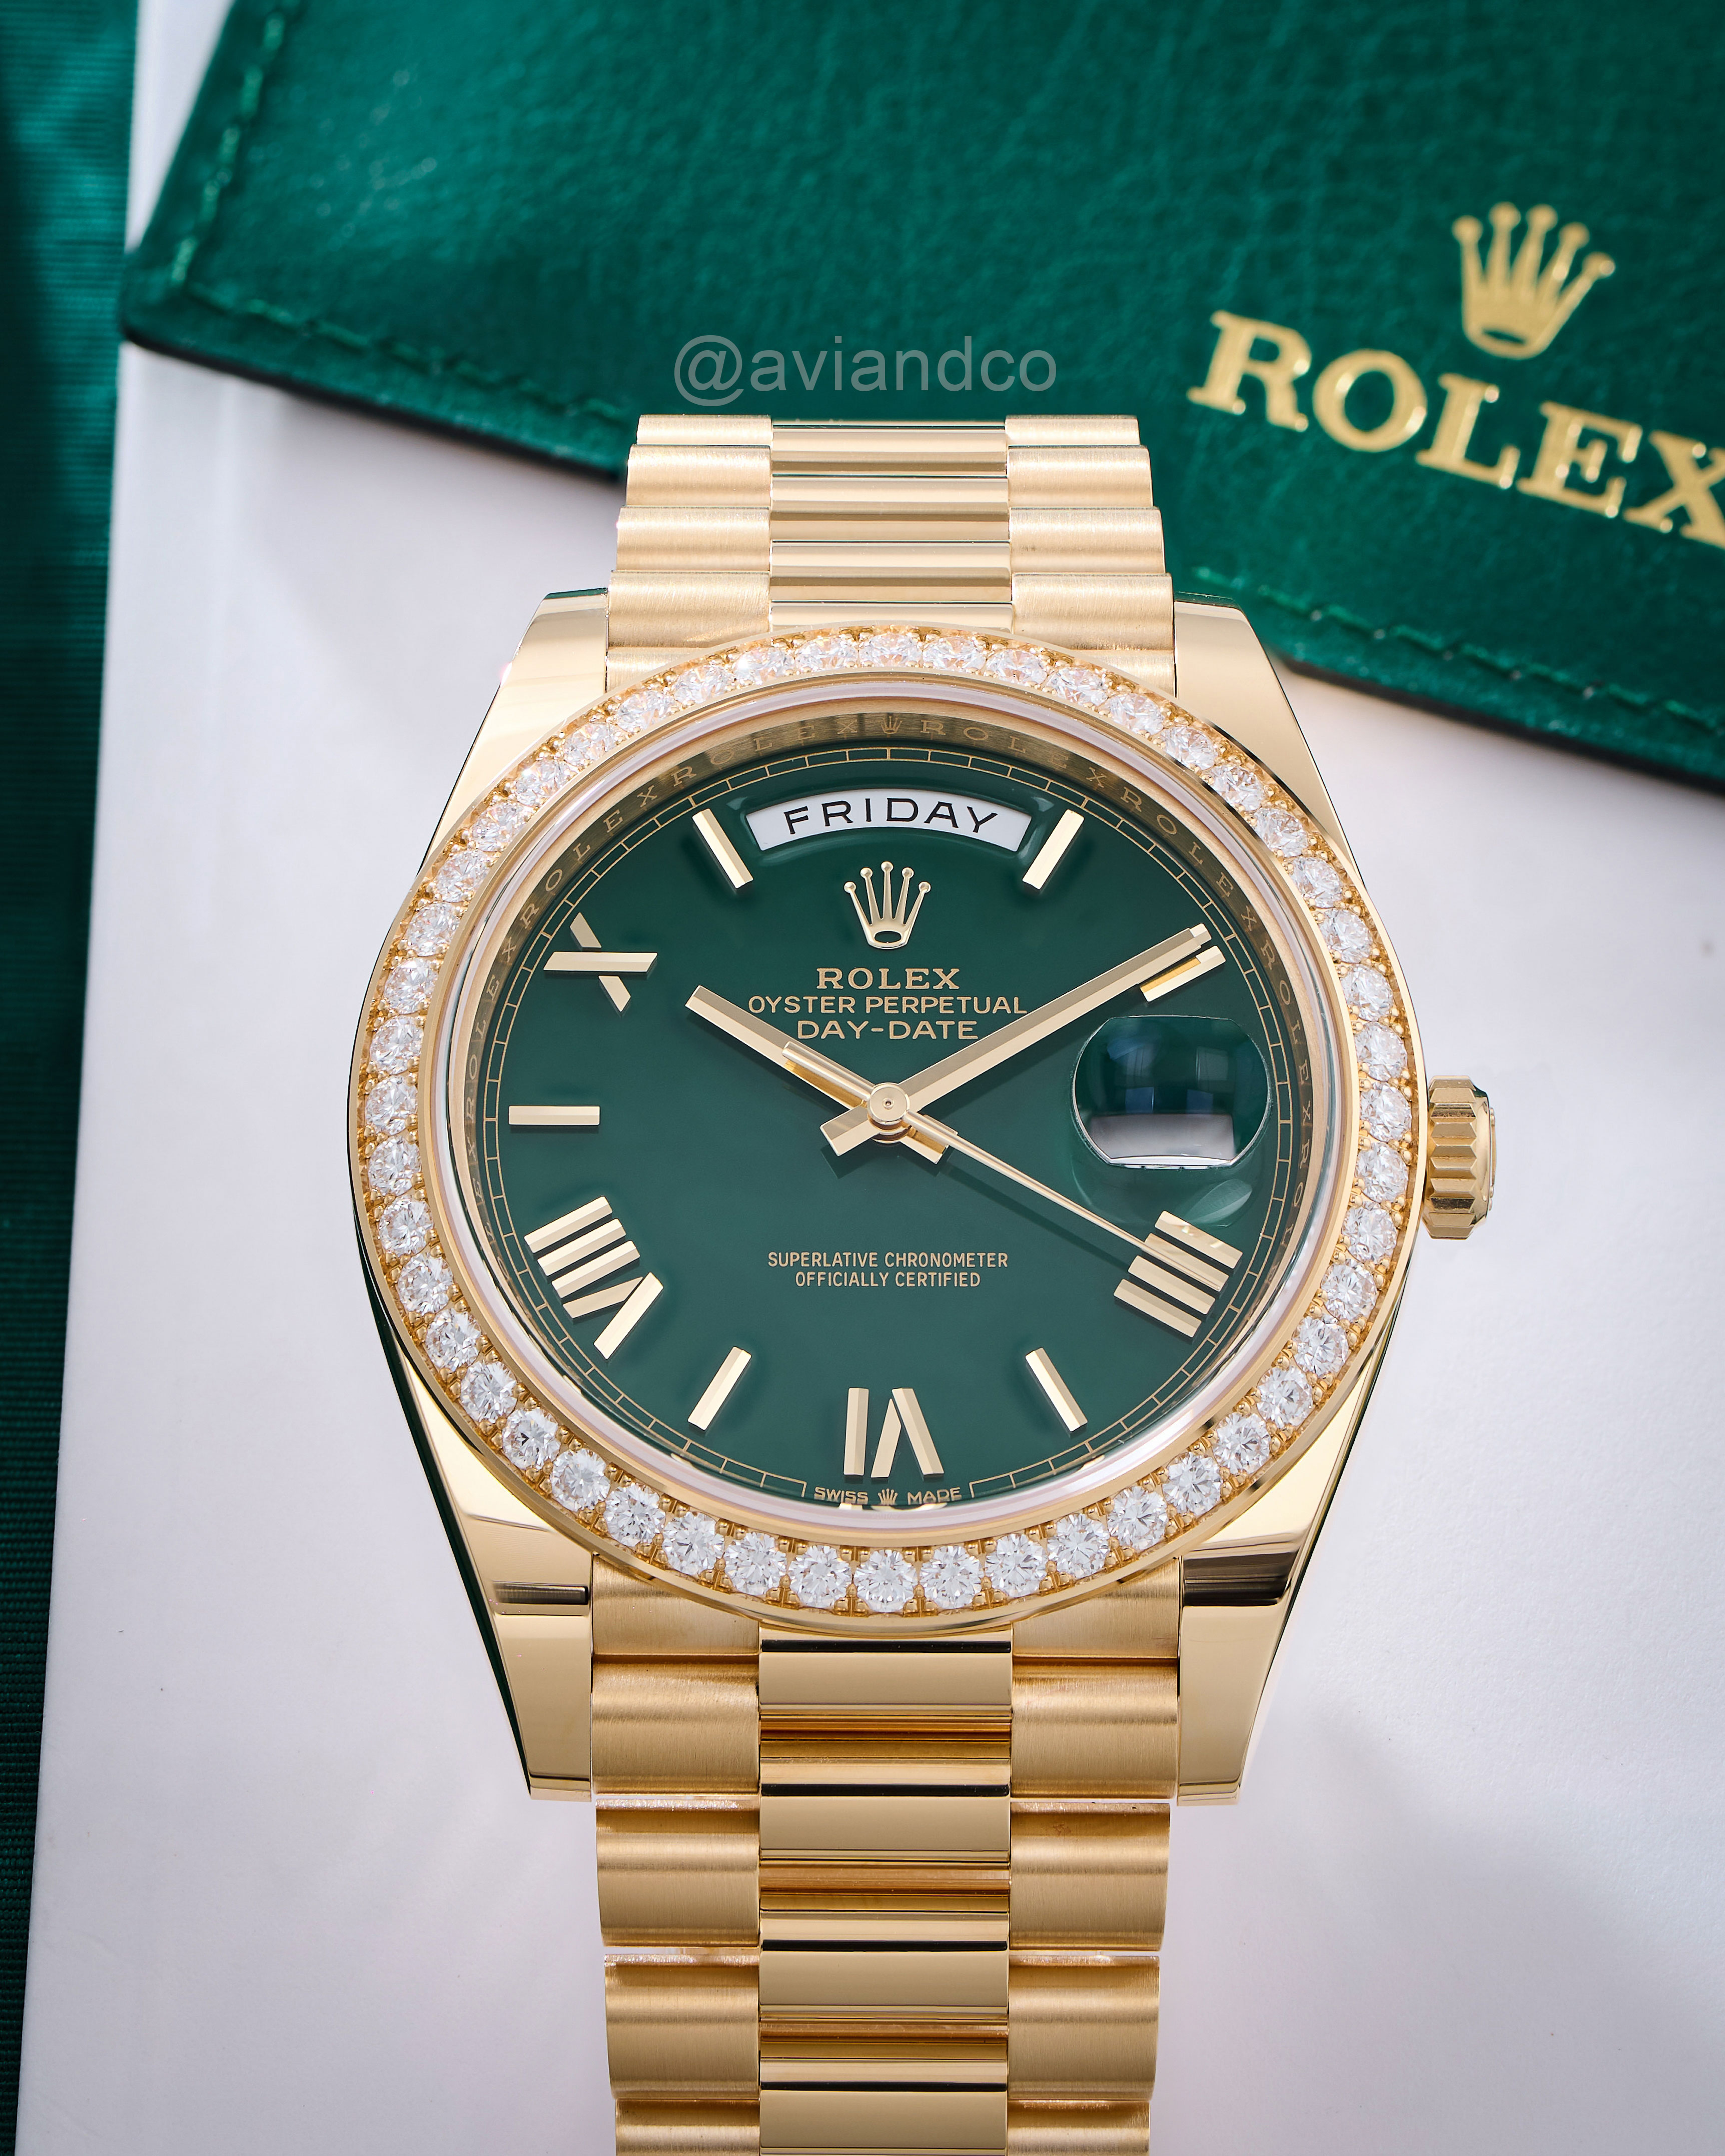 Green Dial with Diamond-Bezel Timepiece with Roman Numerals on a White Background.